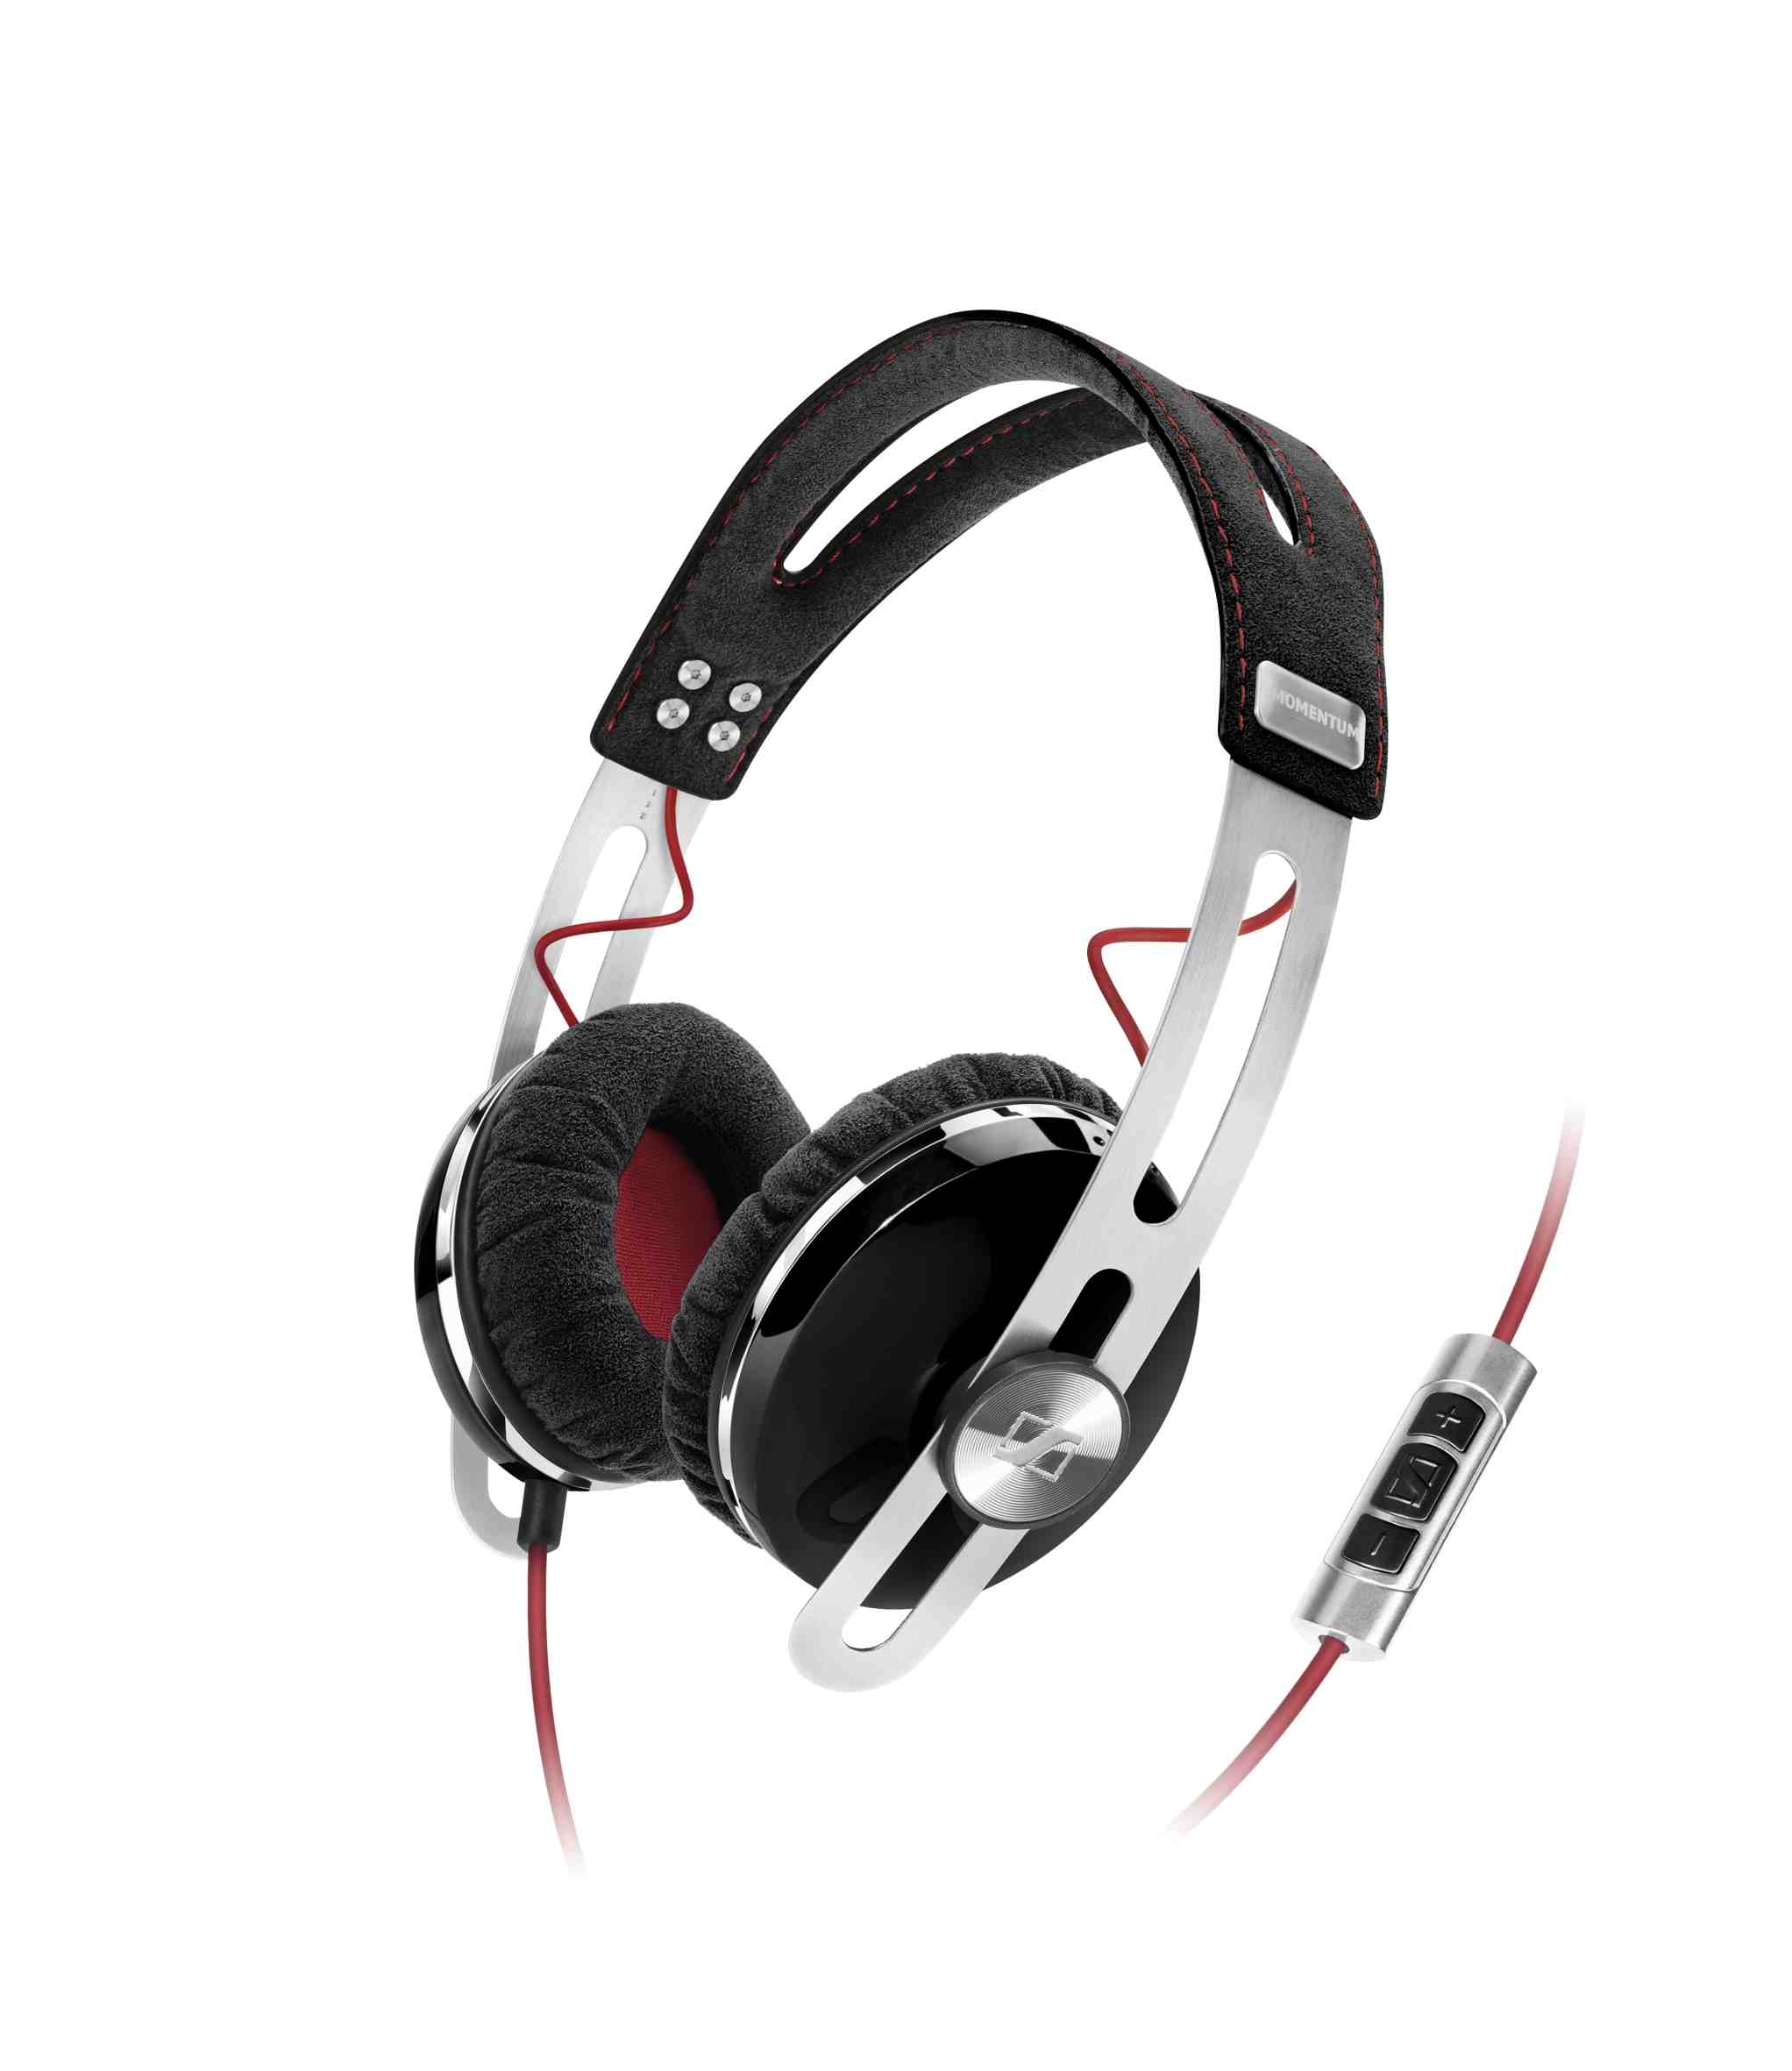 Essential style: The new MOMENTUM On-Ear in black, brown and red brings performance and sleek, understated beauty